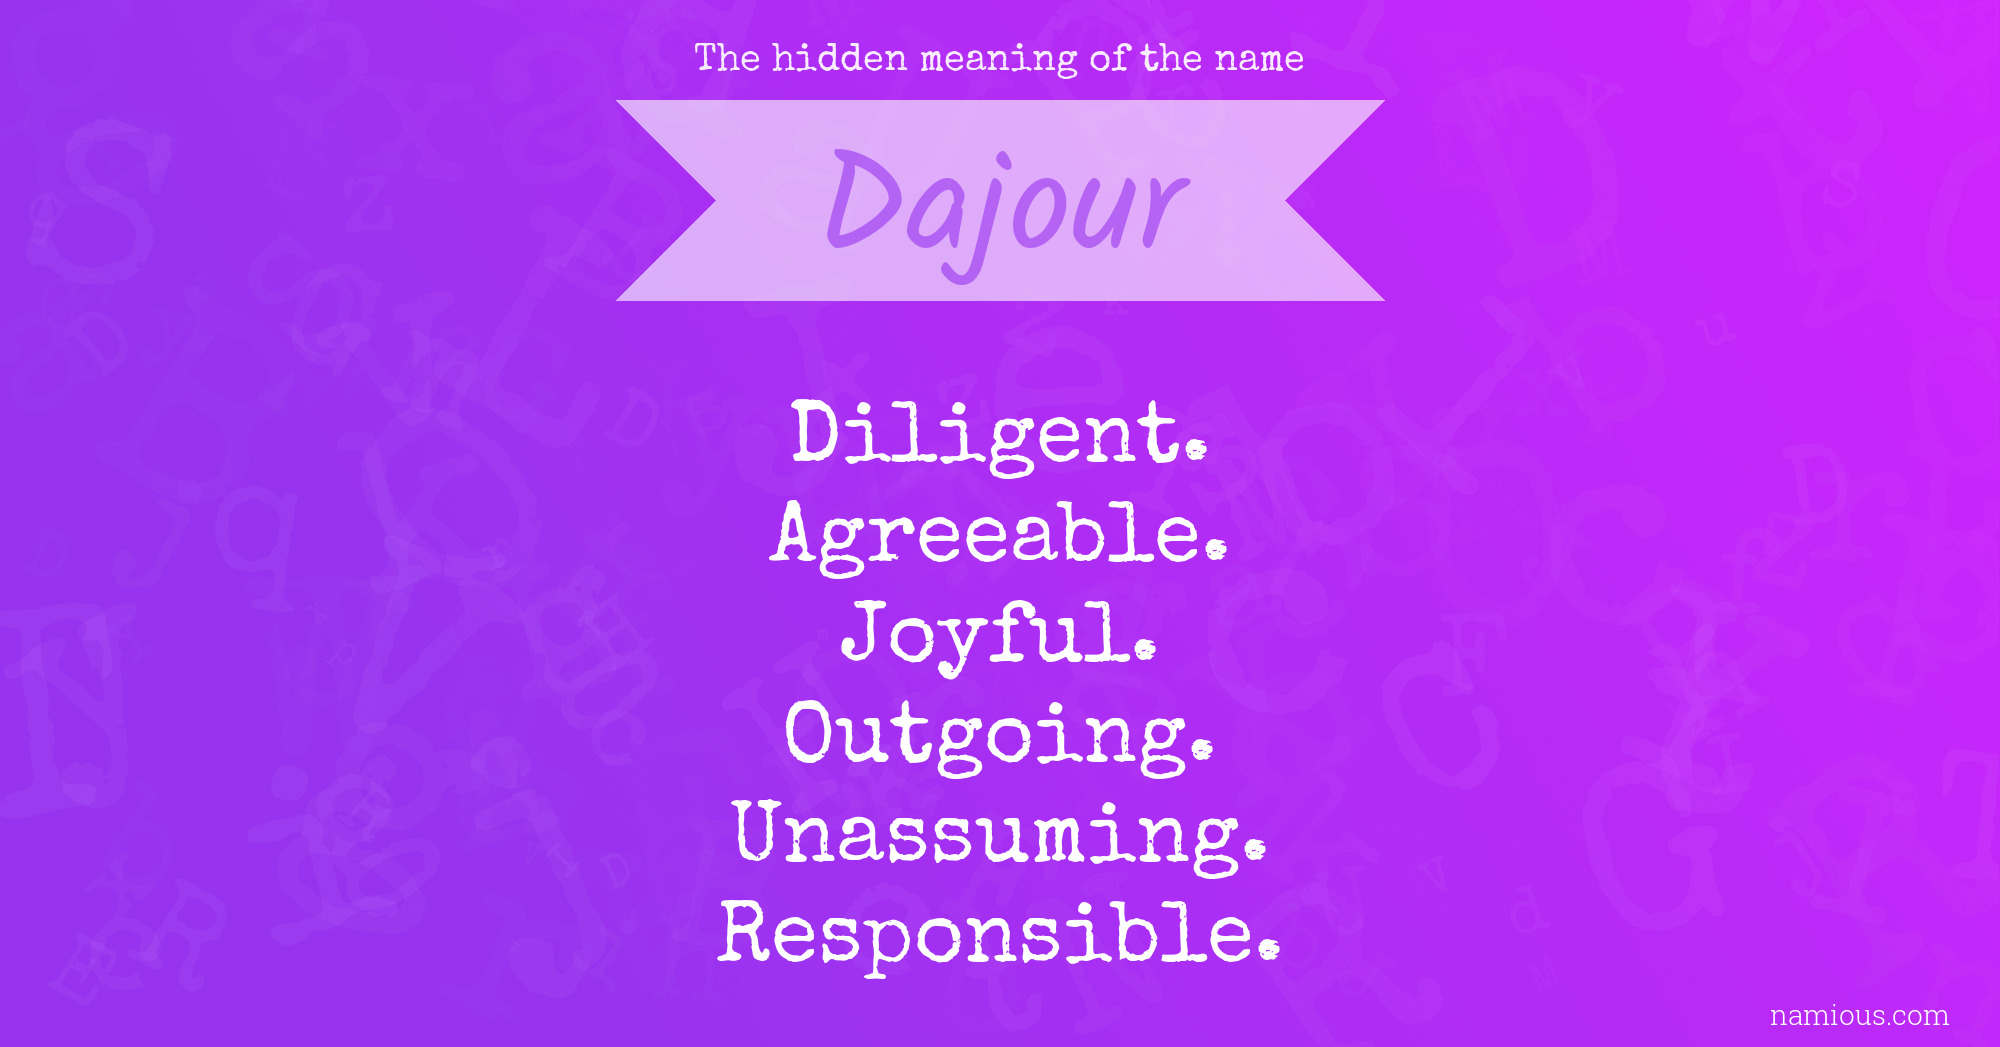 The hidden meaning of the name Dajour